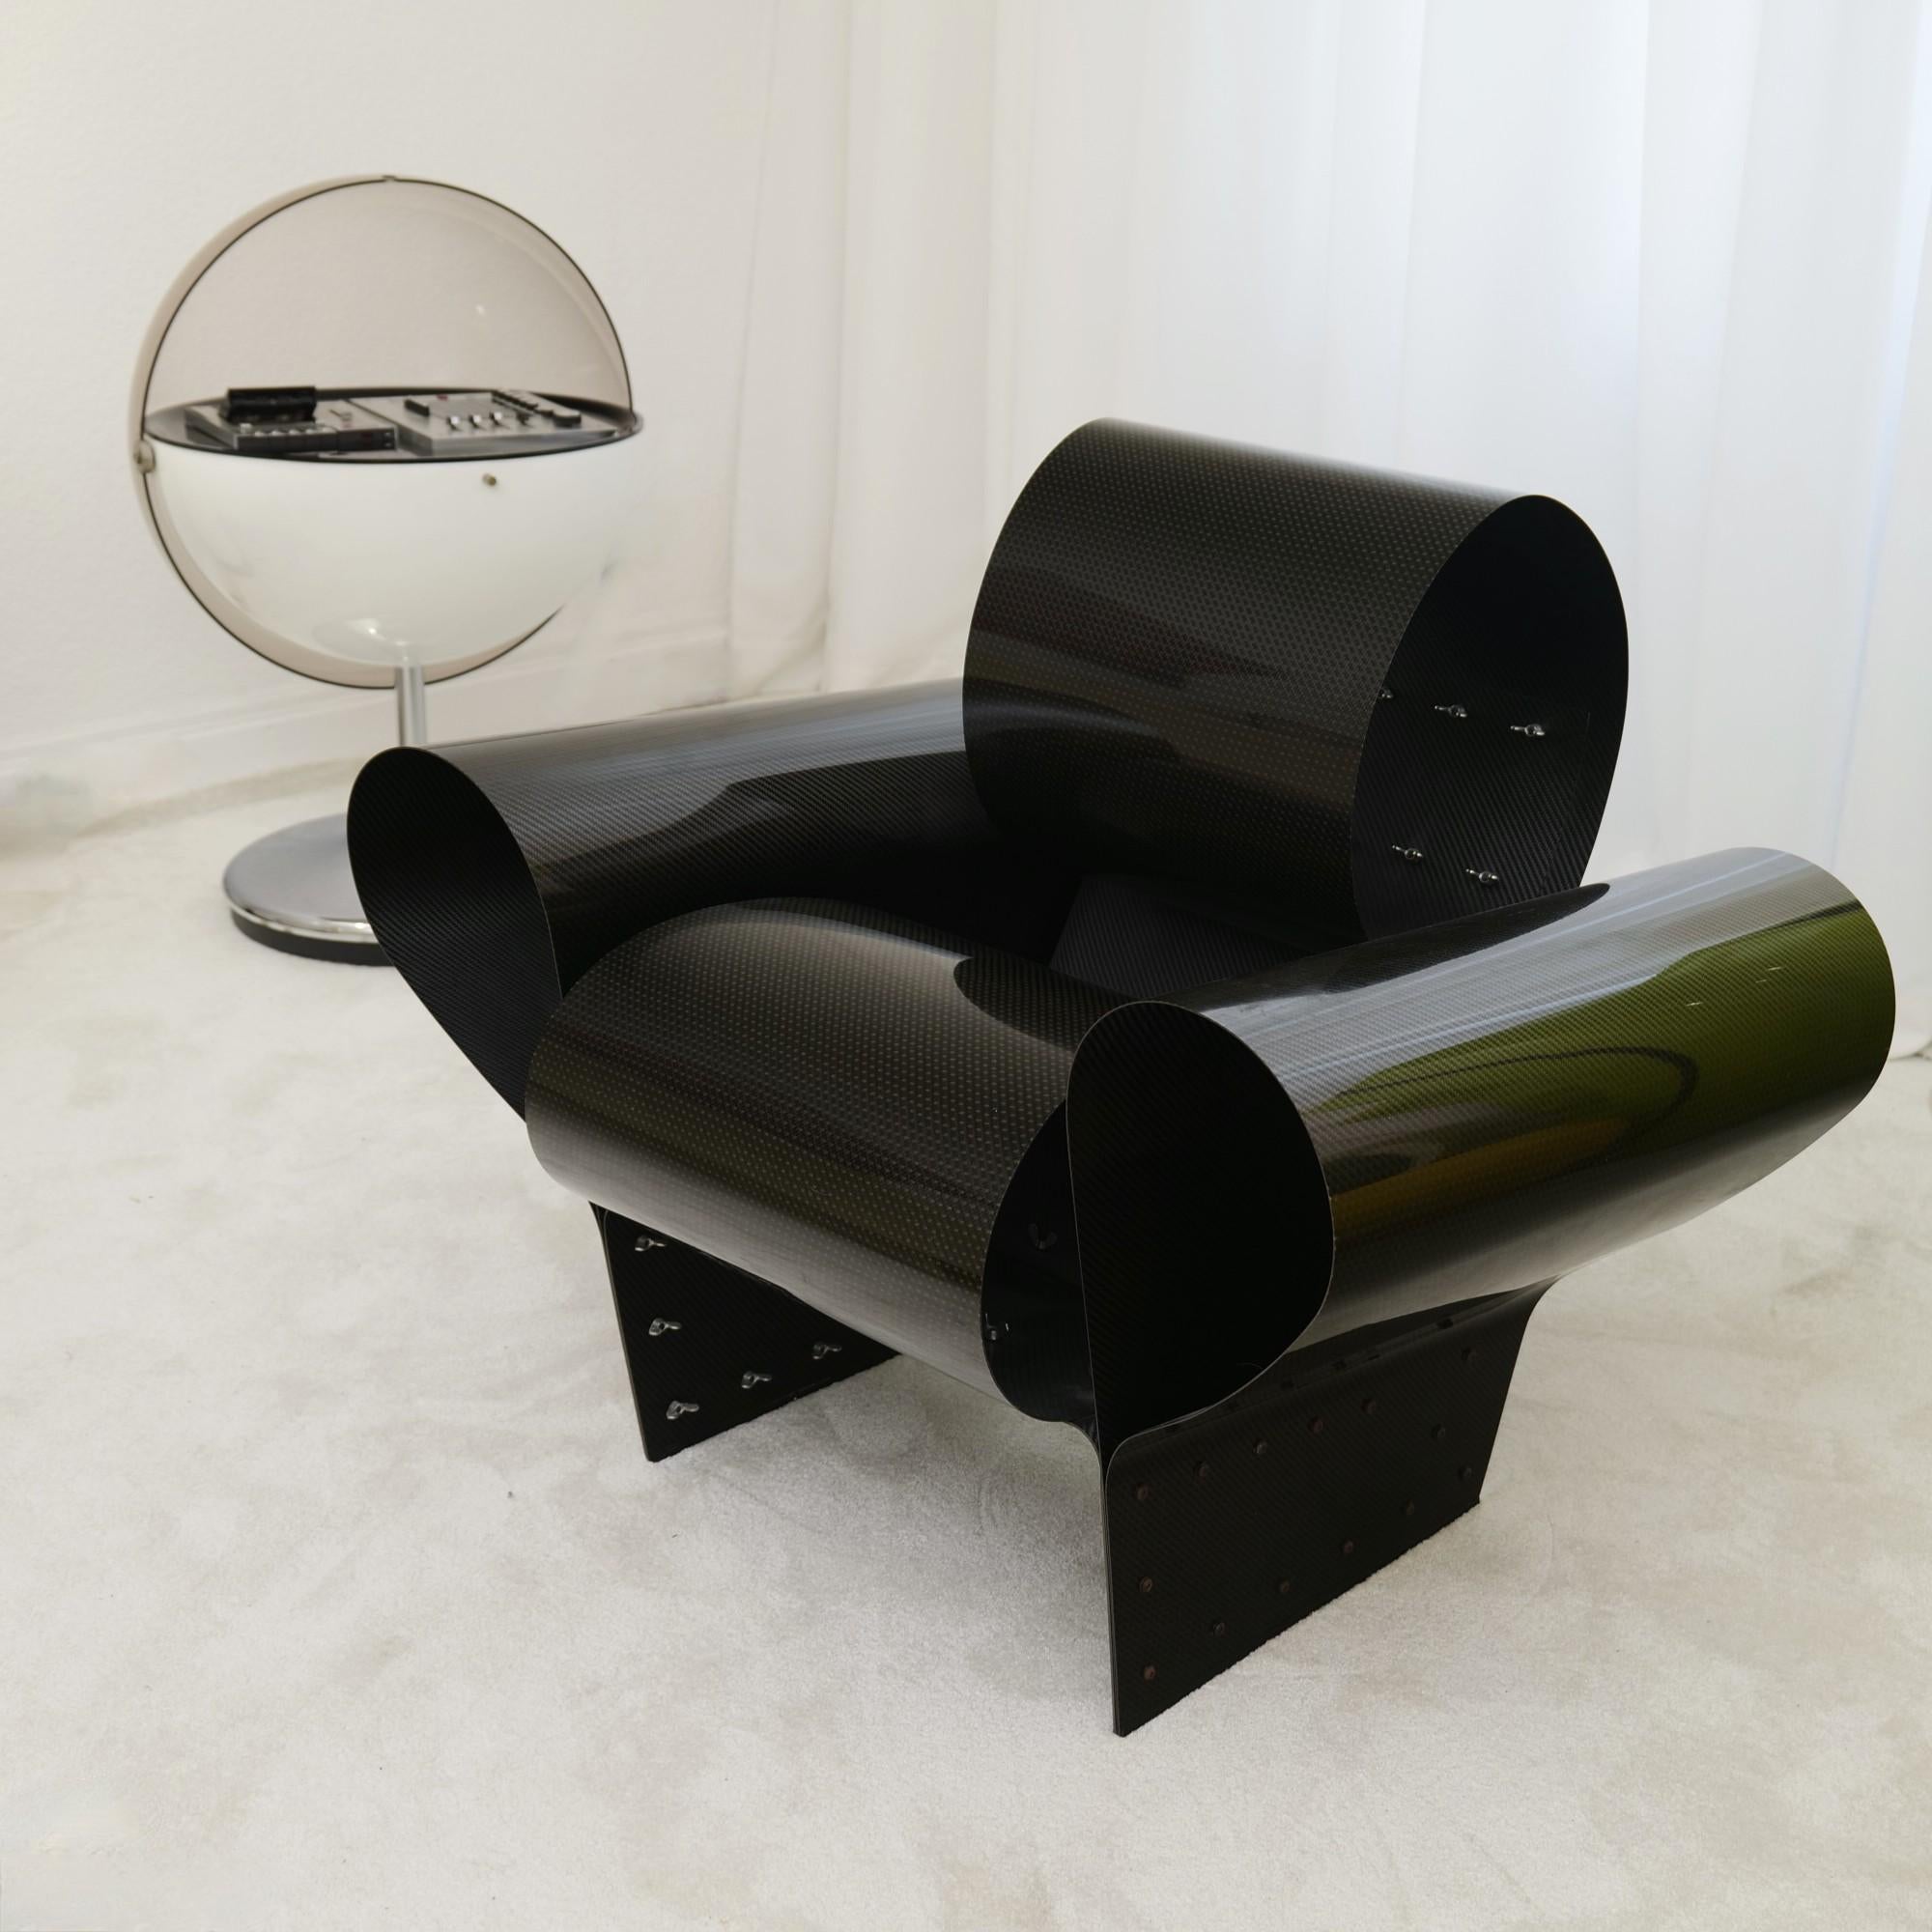 Iconic limited Edition Ron Arad carbon tempered chair by Ron Arad. Vitra ended the production by 2009 and only 200 were produced.

Made in Germany in 2002 by Vitra

material:
carbon fiber.

good condition with slight signs of patina and use